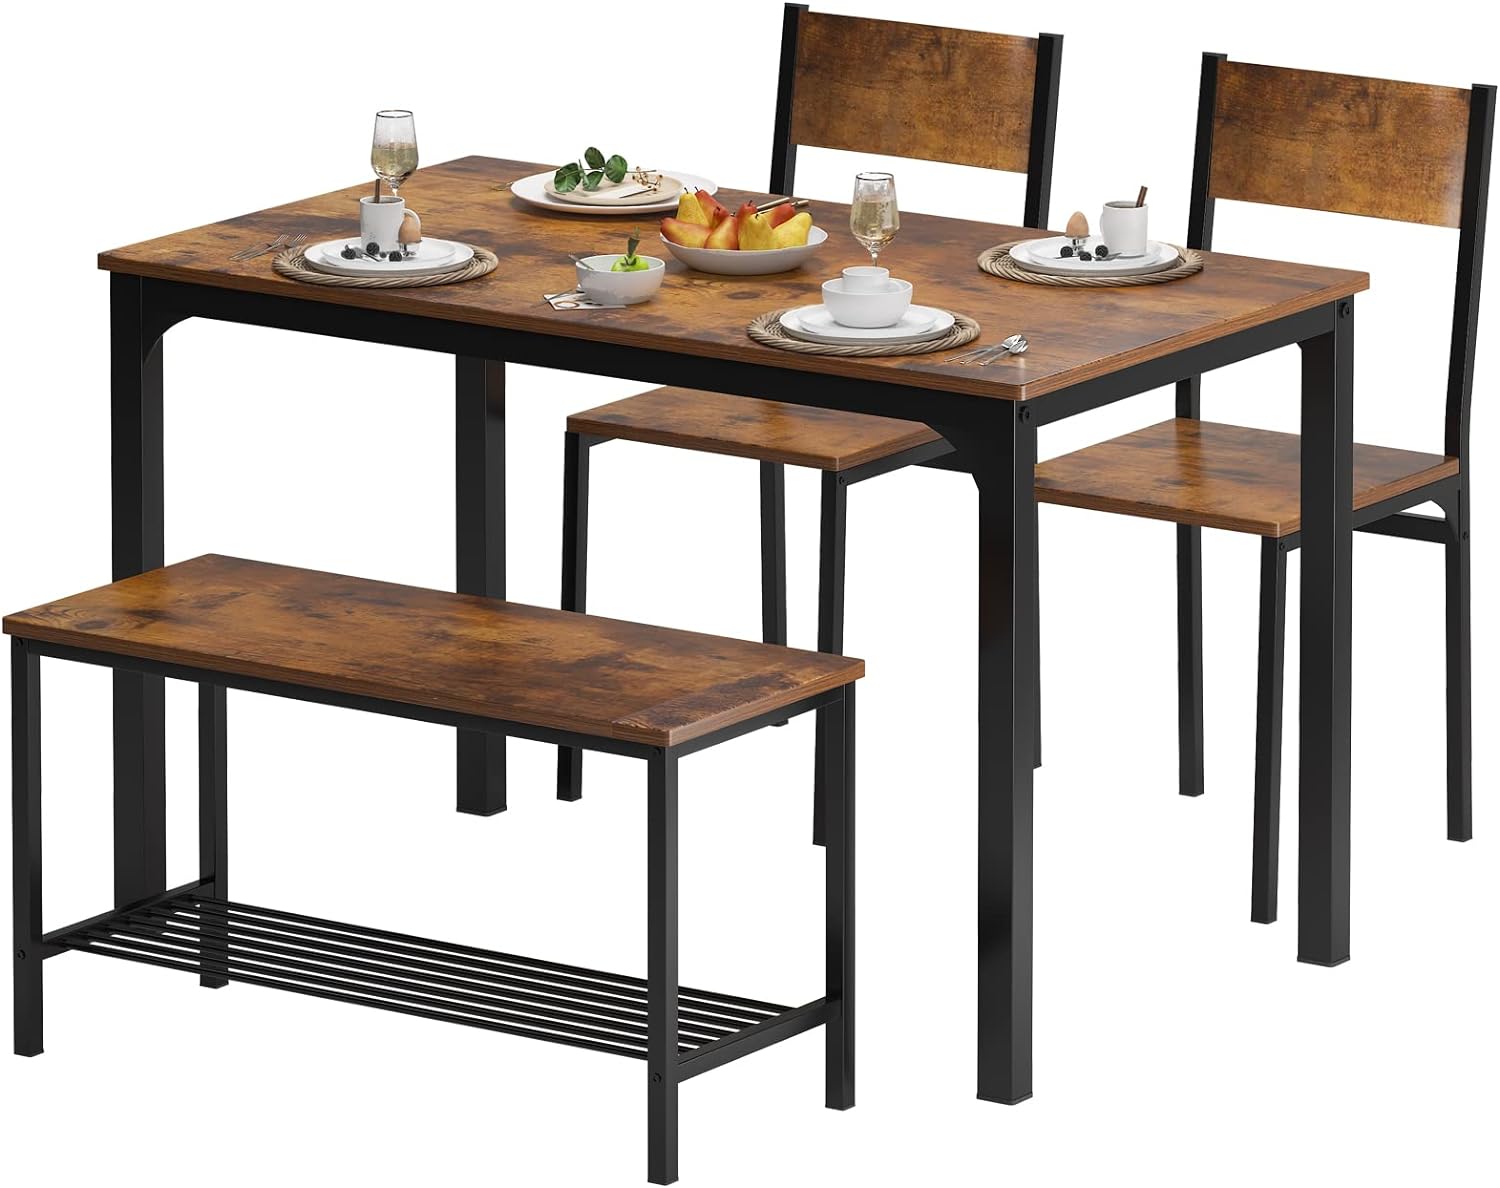 SDHYL Dining Table Set,Two Chairs and One Bench 4 Pieces Set Wooden Table Top with Metal Legs for Breakfast in Living Room, Kitchen Room, Dining Room,Space Saving Kitchen Table Set,Rustic Brown